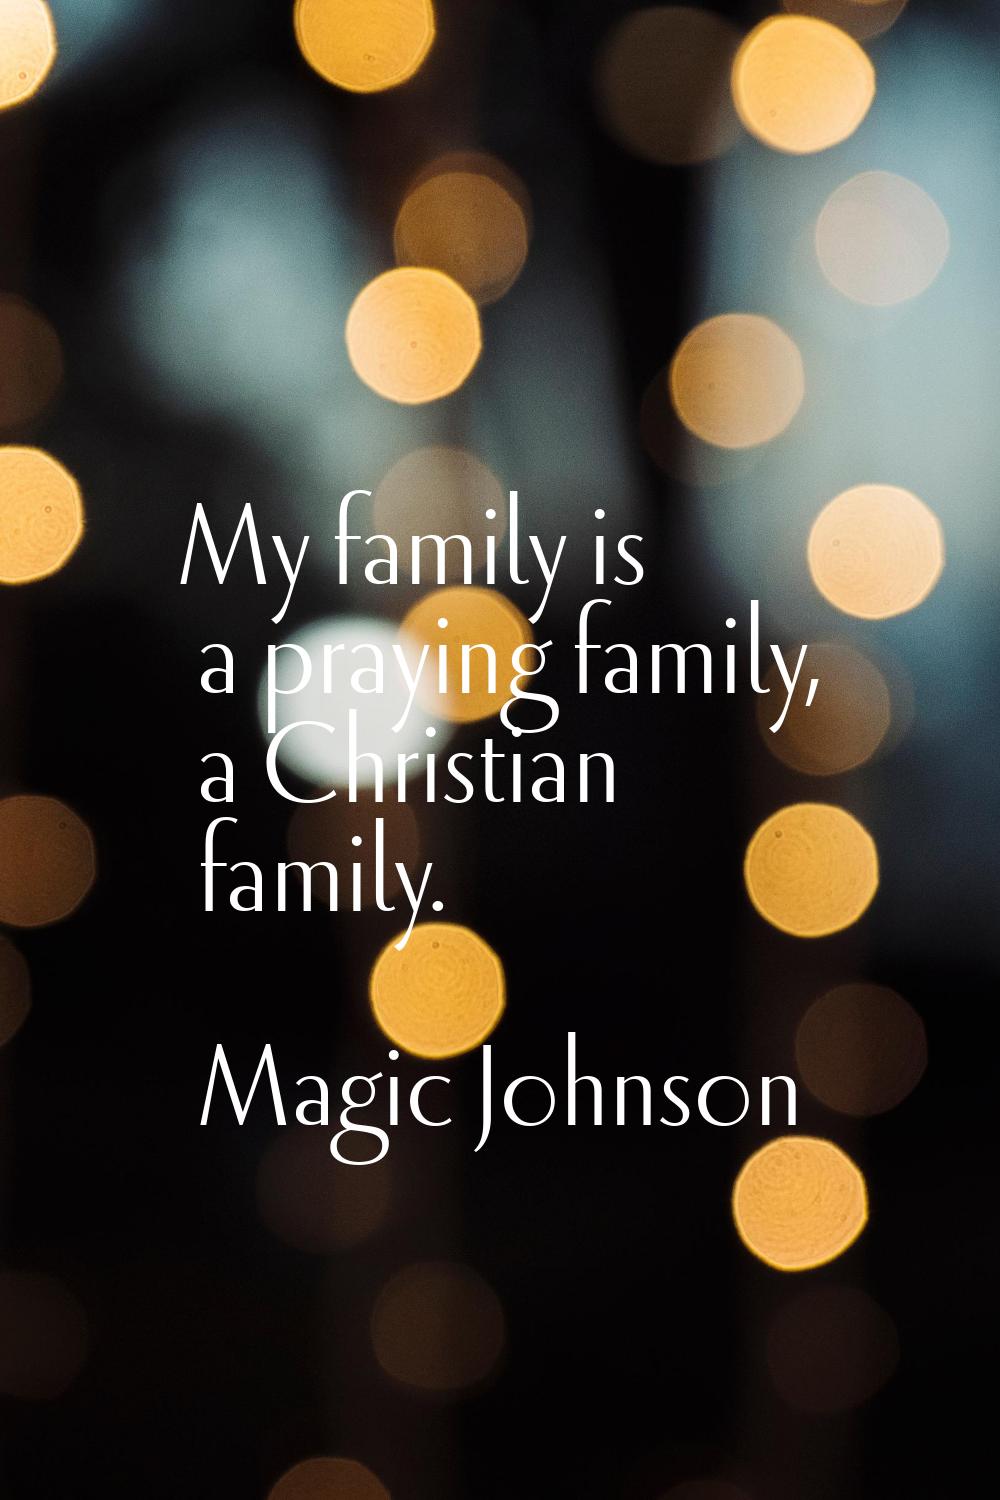 My family is a praying family, a Christian family.